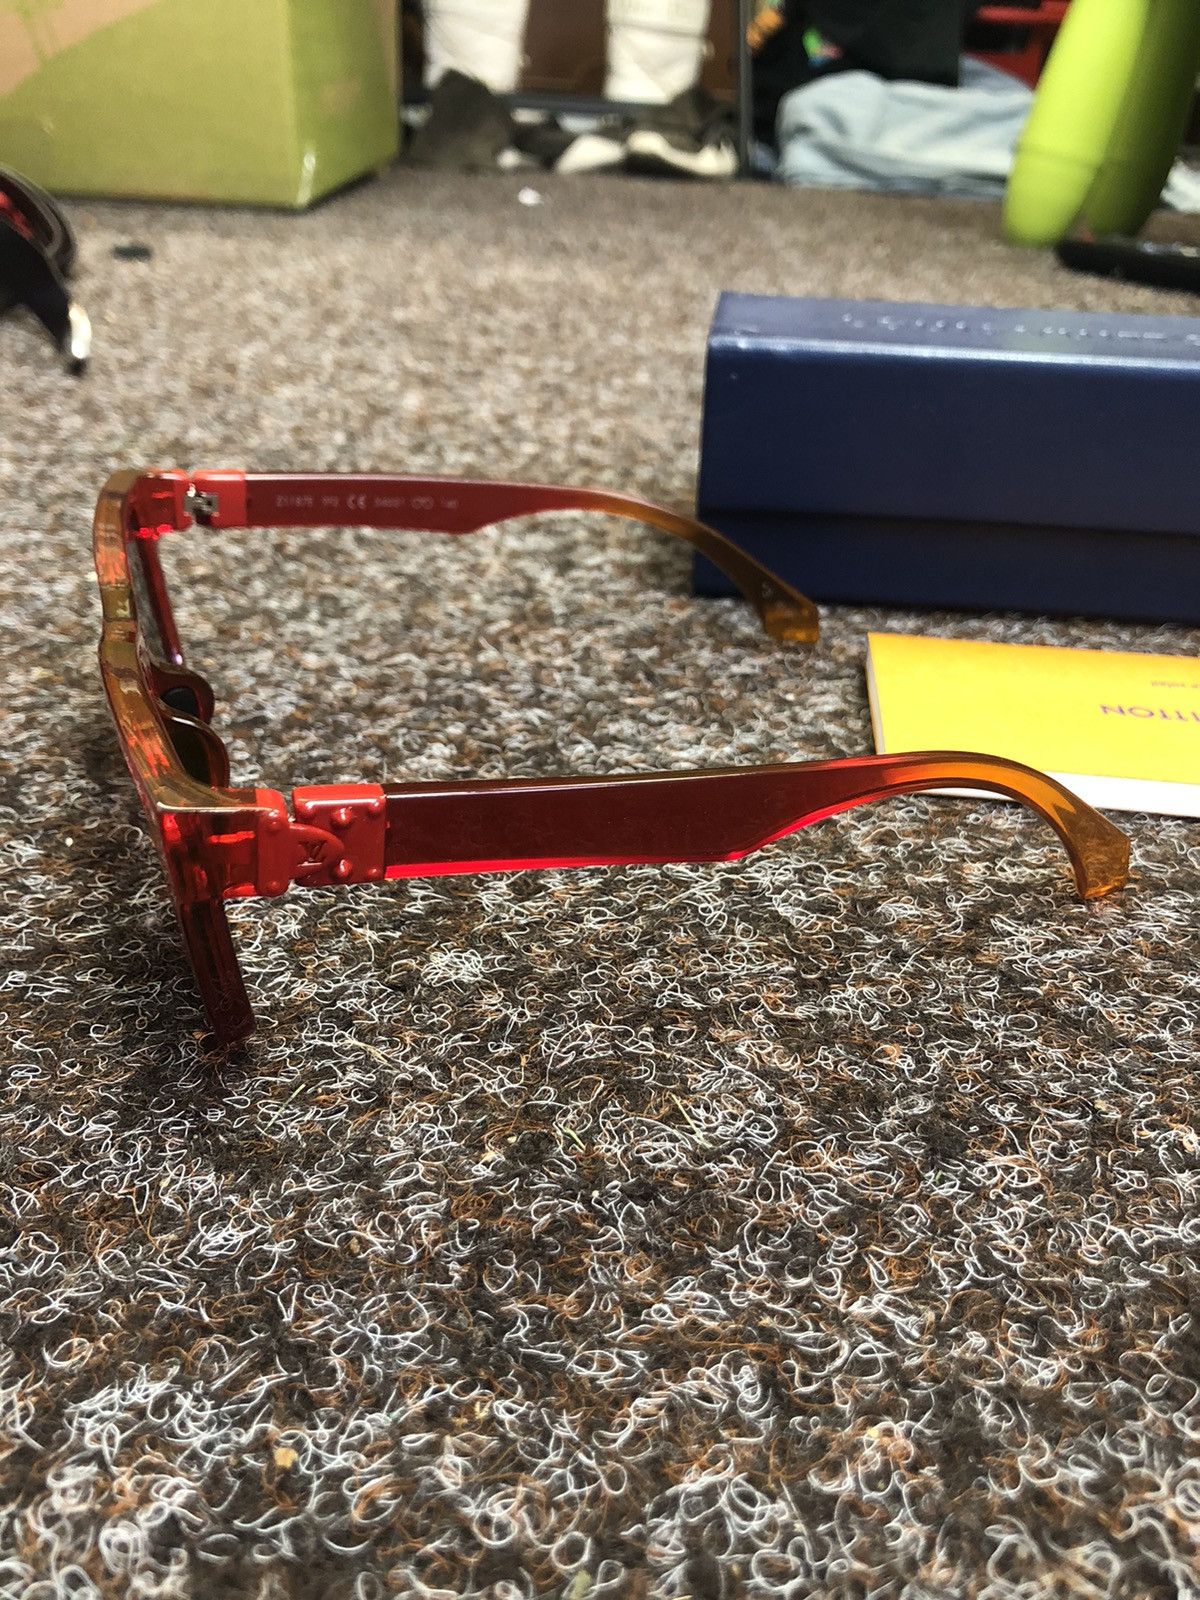 Louis Vuitton Rare NYC Exclusive Red Cyclone Sunglasses